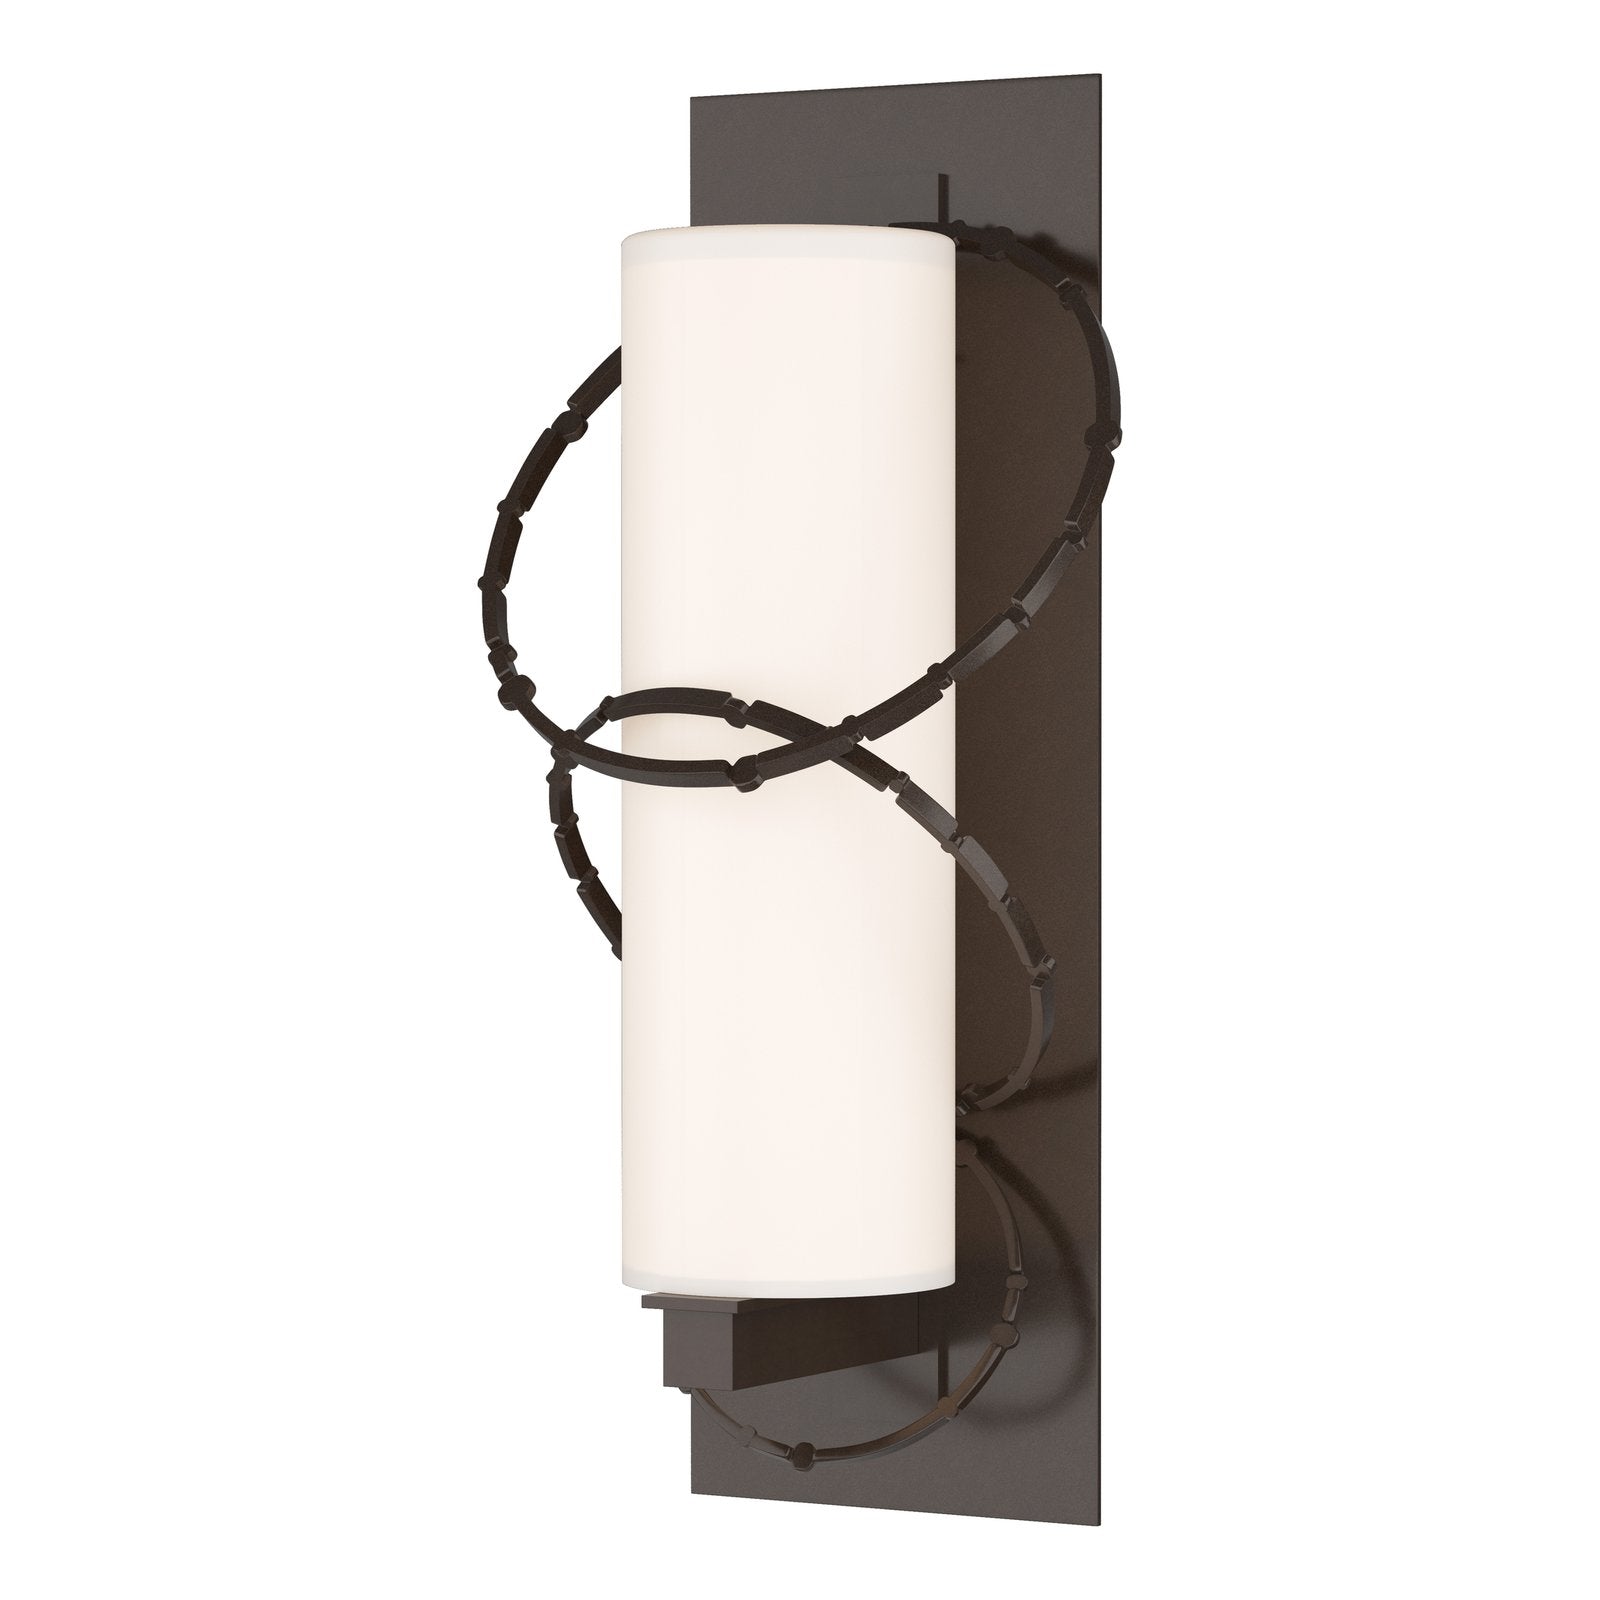 Hubbardton Forge Olympus Large Outdoor Sconce Outdoor l Wall Hubbardton Forge Coastal Bronze  